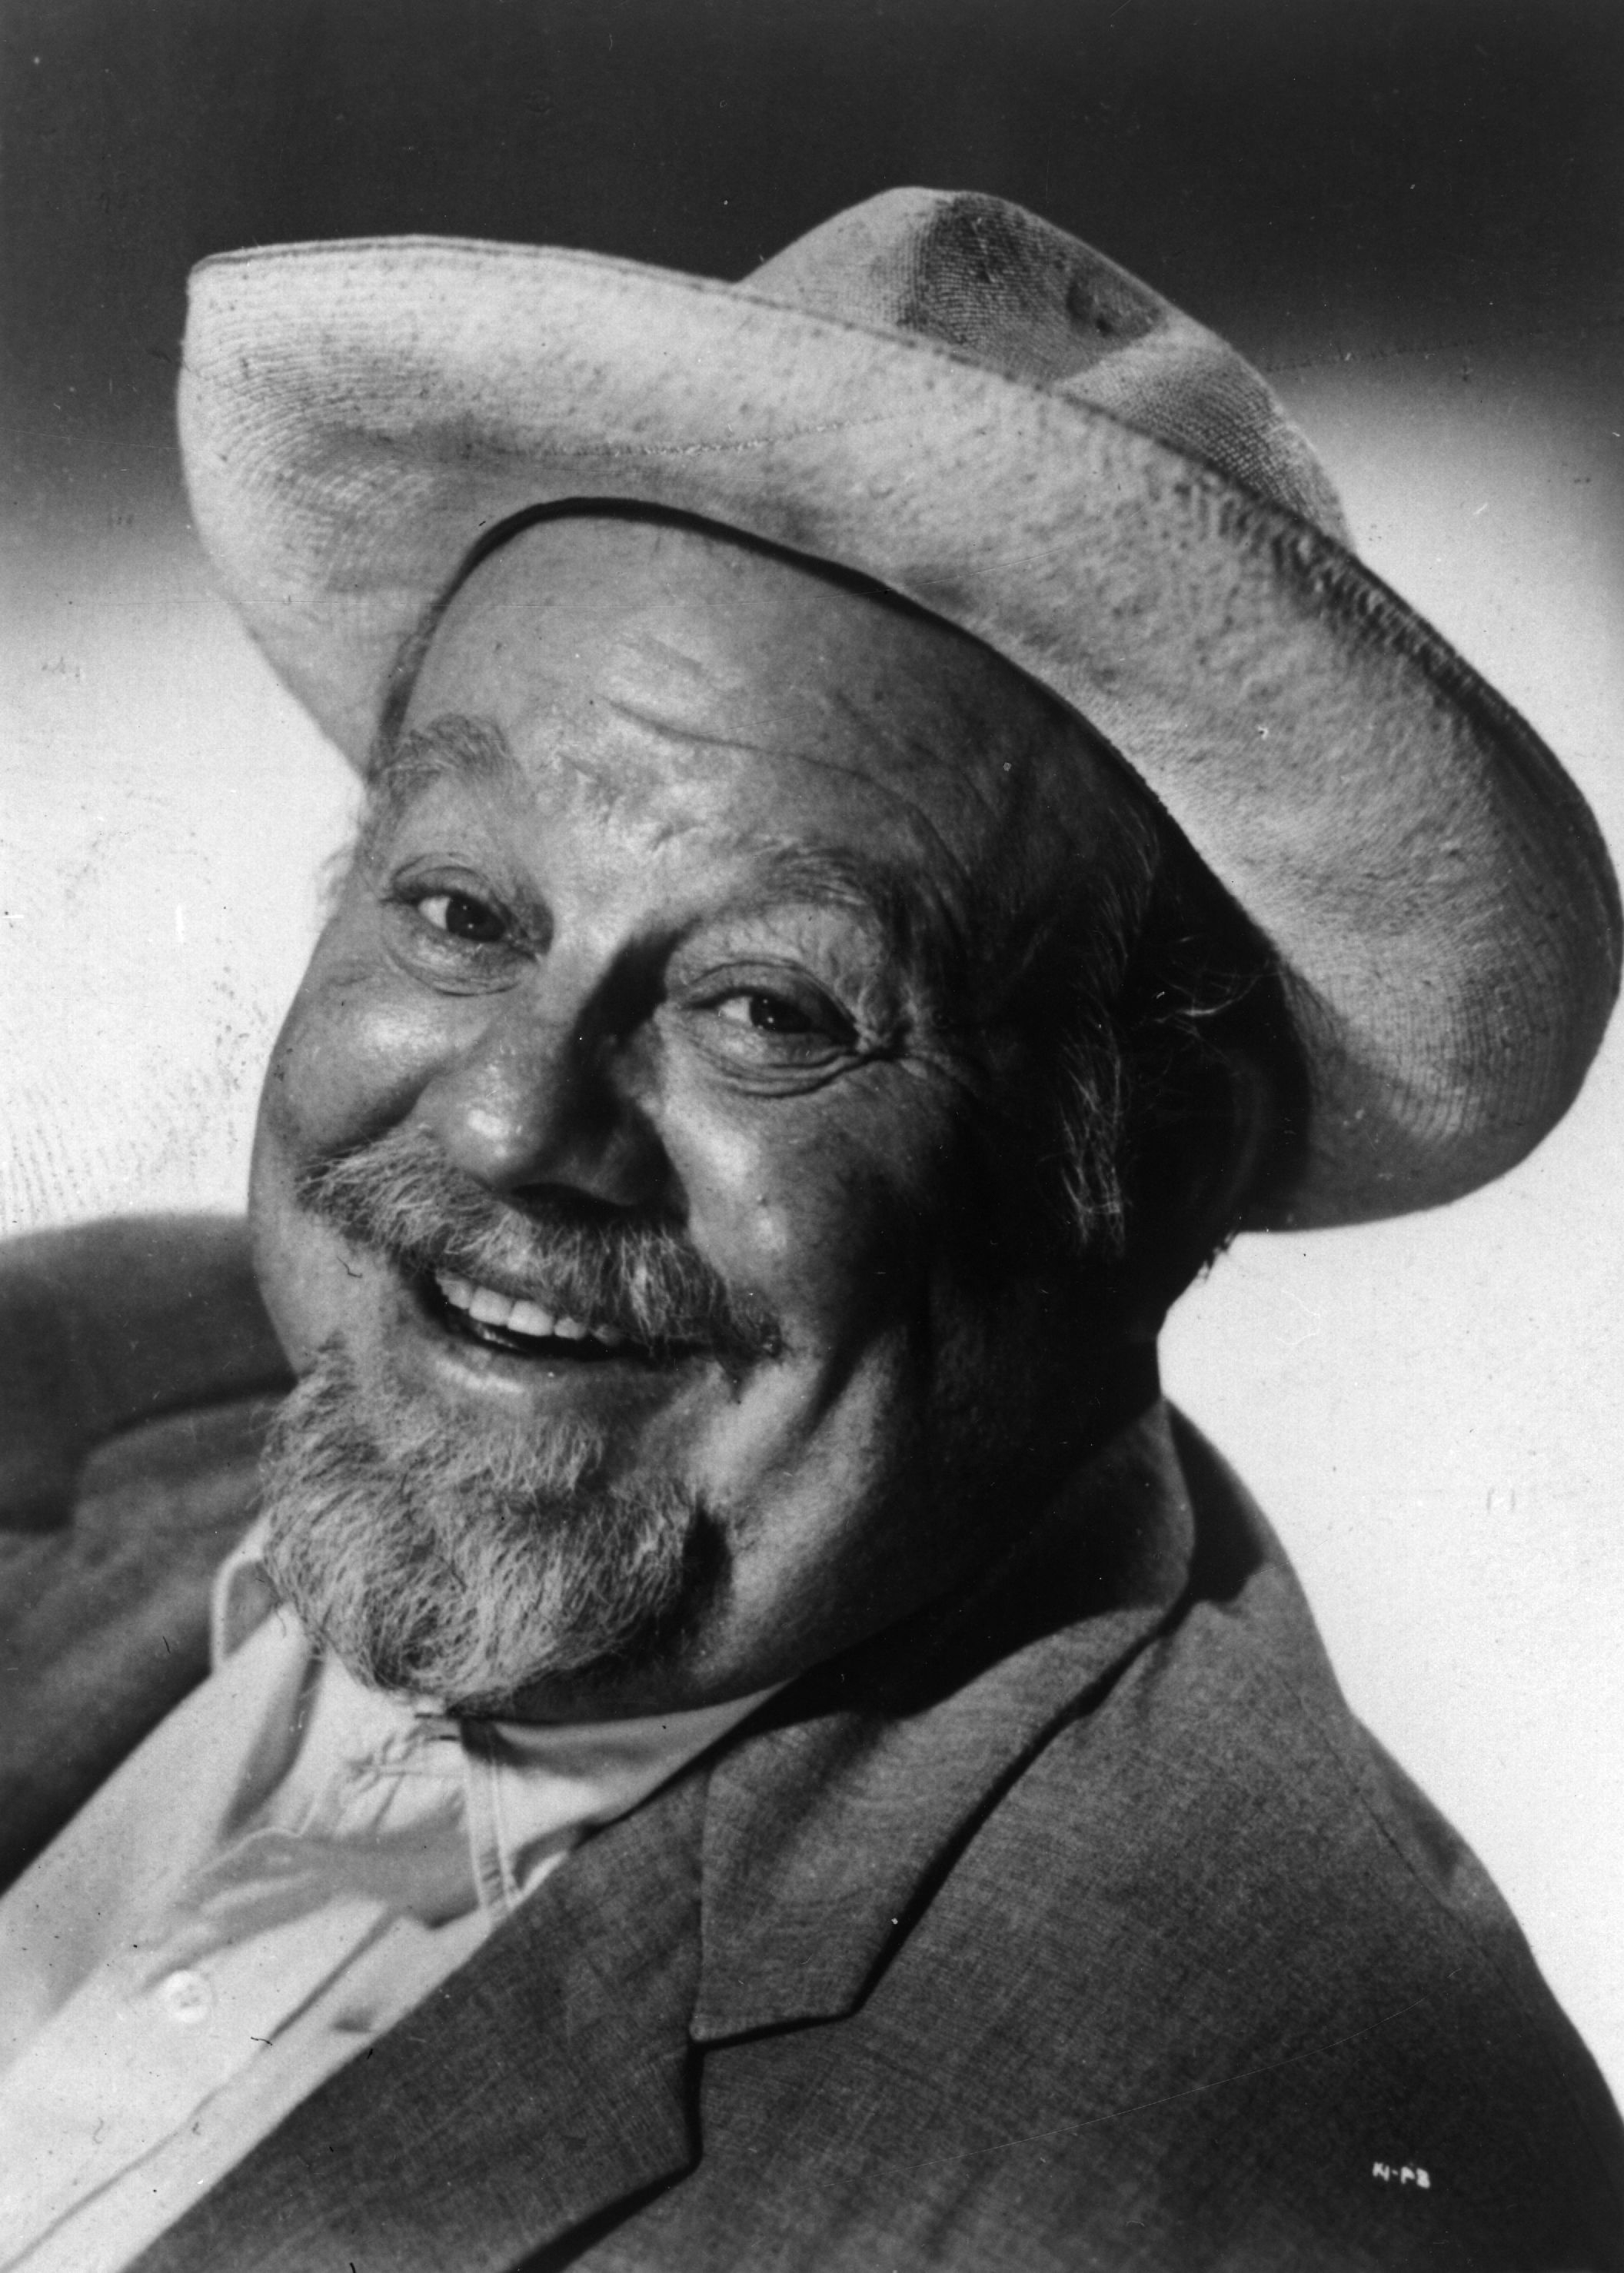 Close-up of a smiling older man wearing a Western-style hat